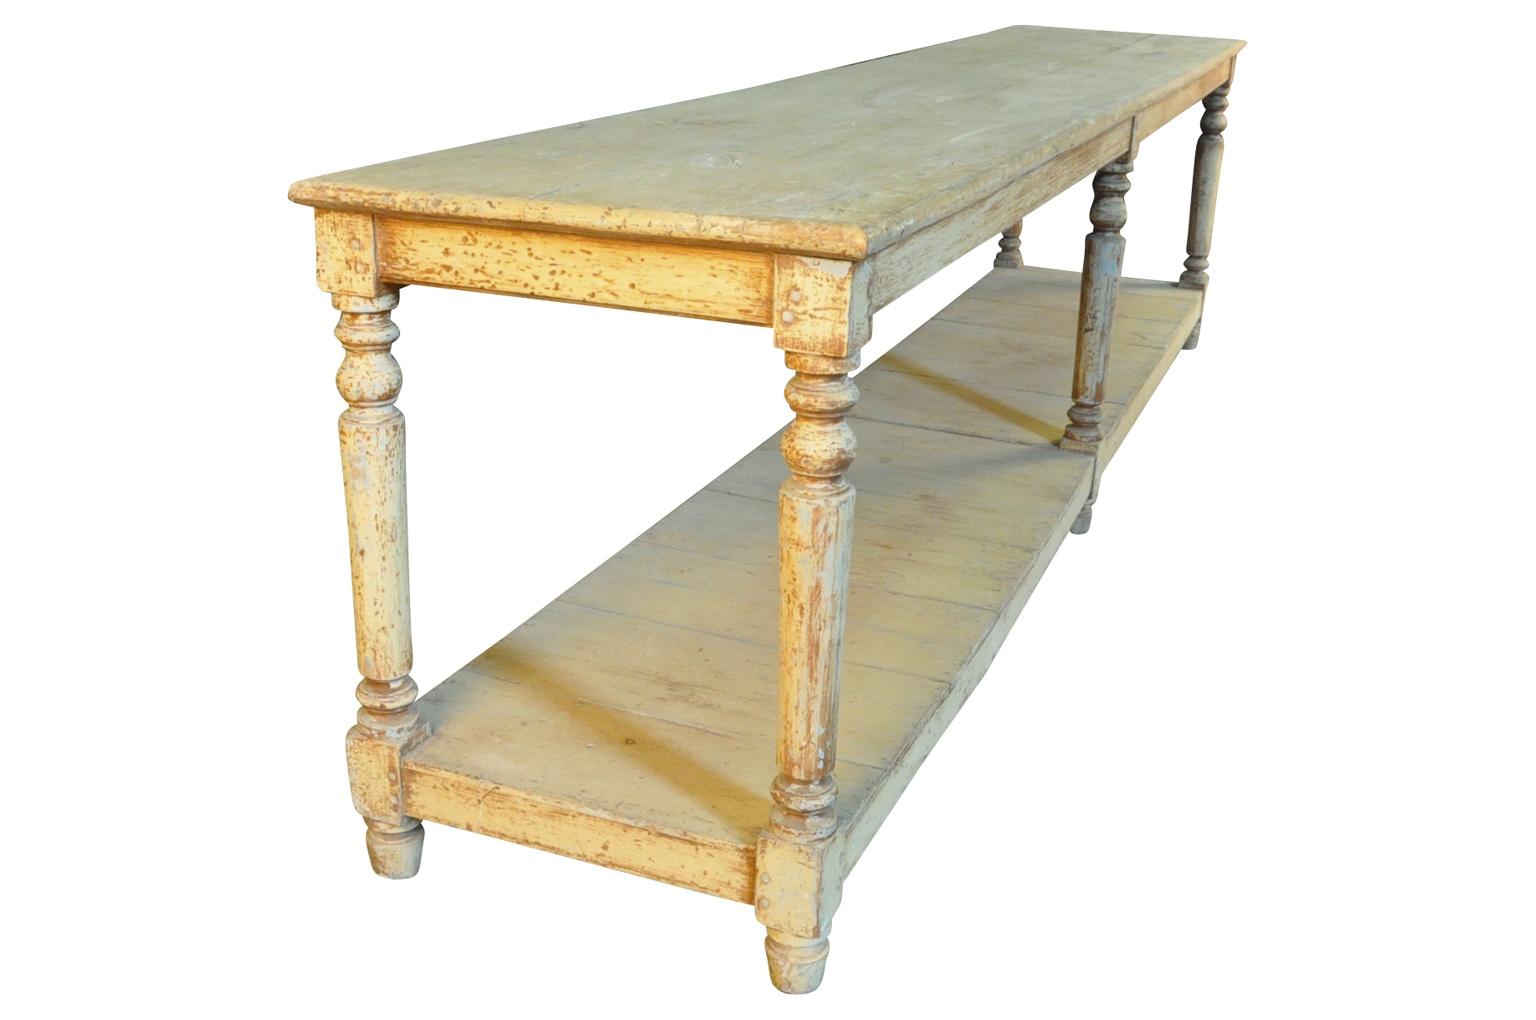 Painted French 19th Century Draper's Table